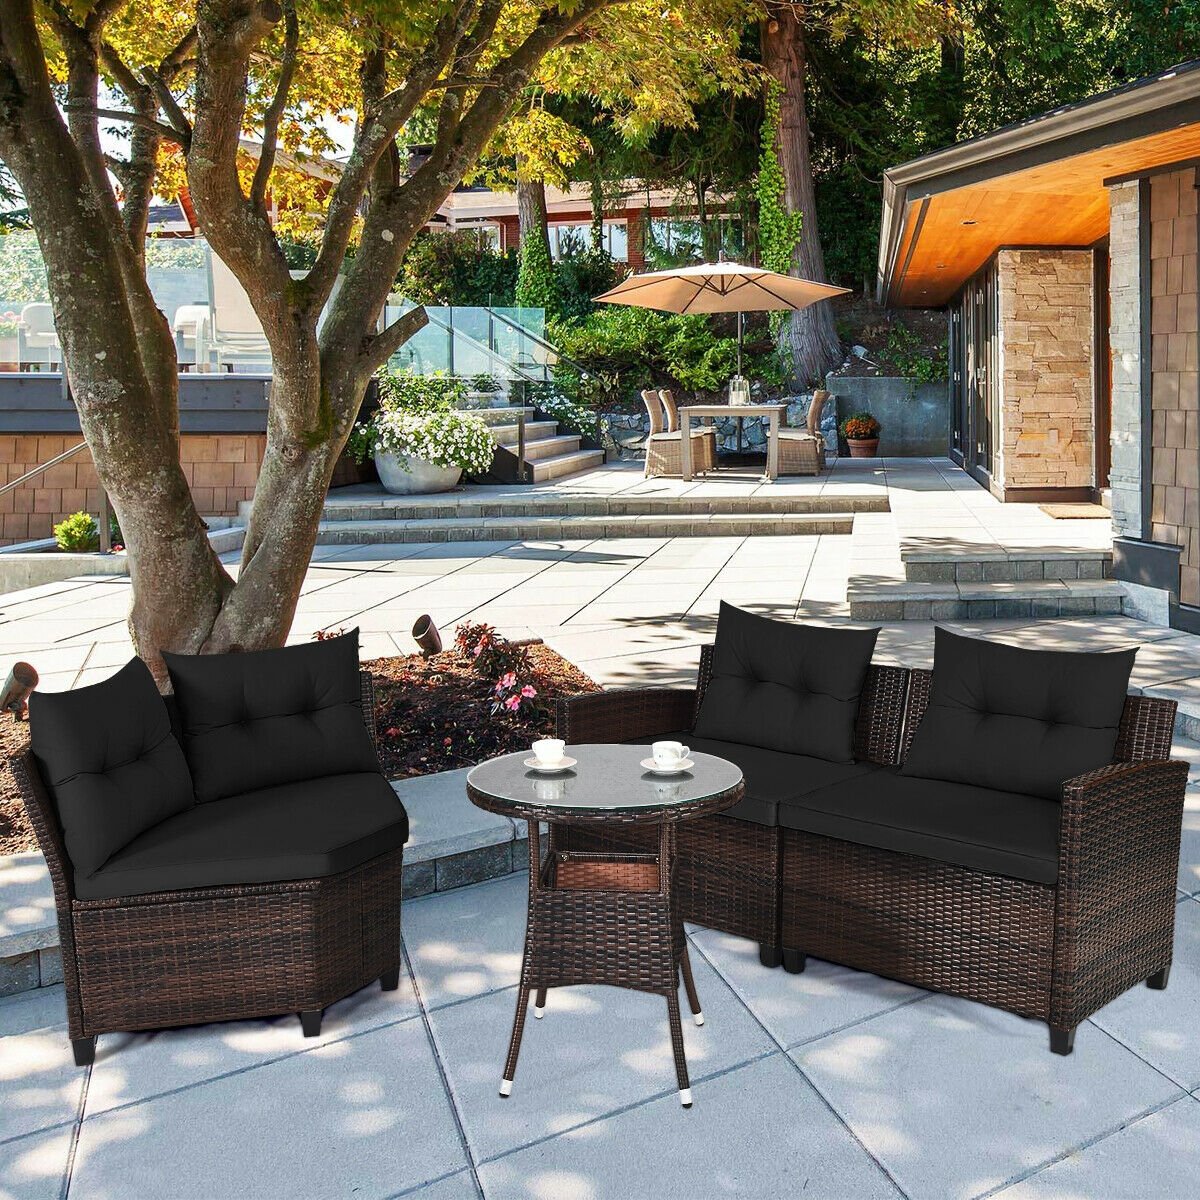 4 Pieces Outdoor Cushioned Rattan Furniture Set, Black - Gallery Canada